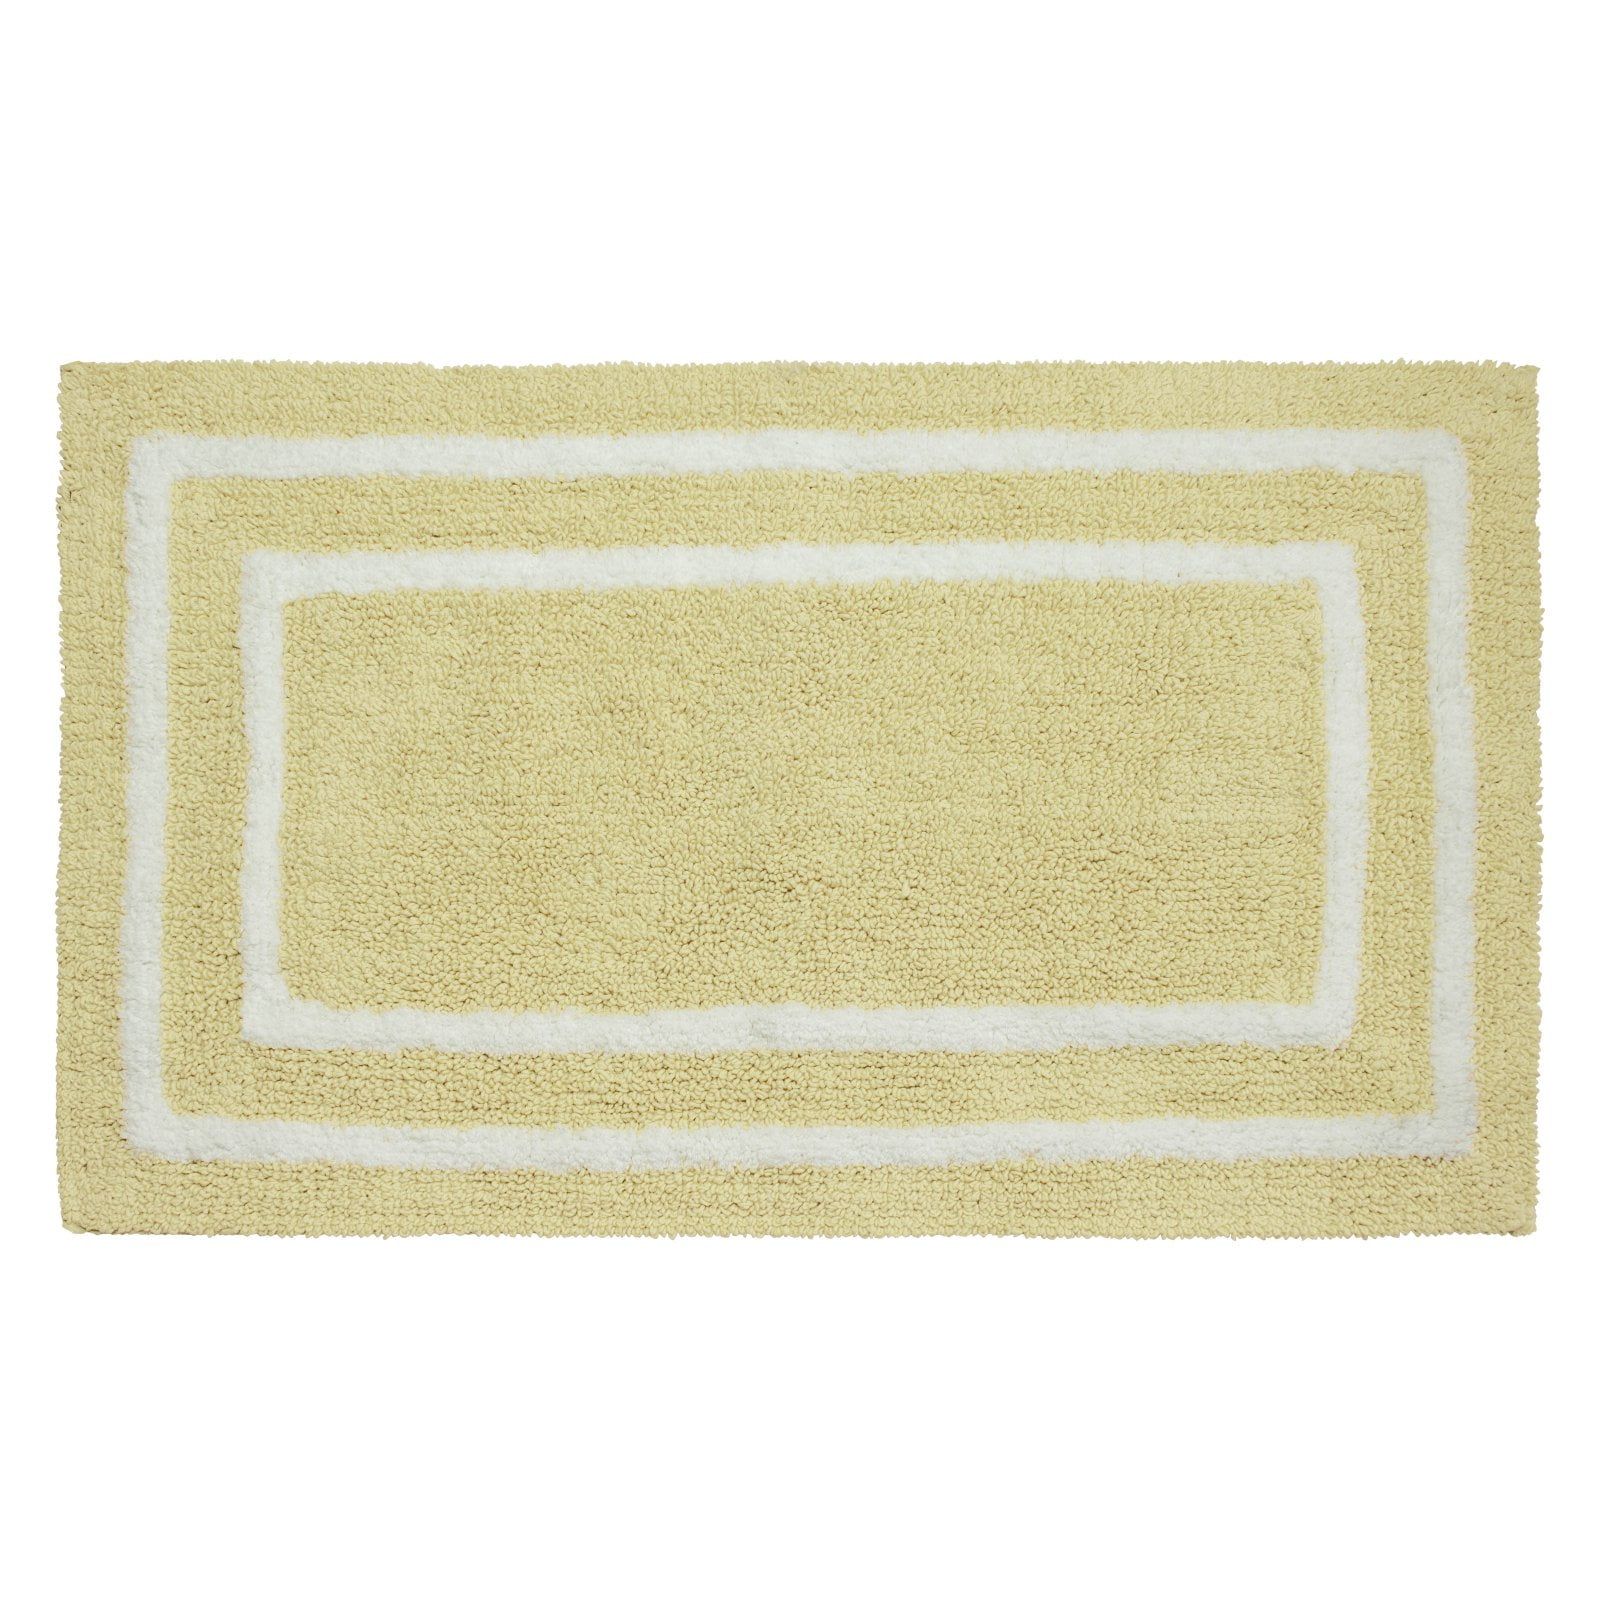 Details about   Hotel Collection Geo Cotton 22" x 36" Bath Rug